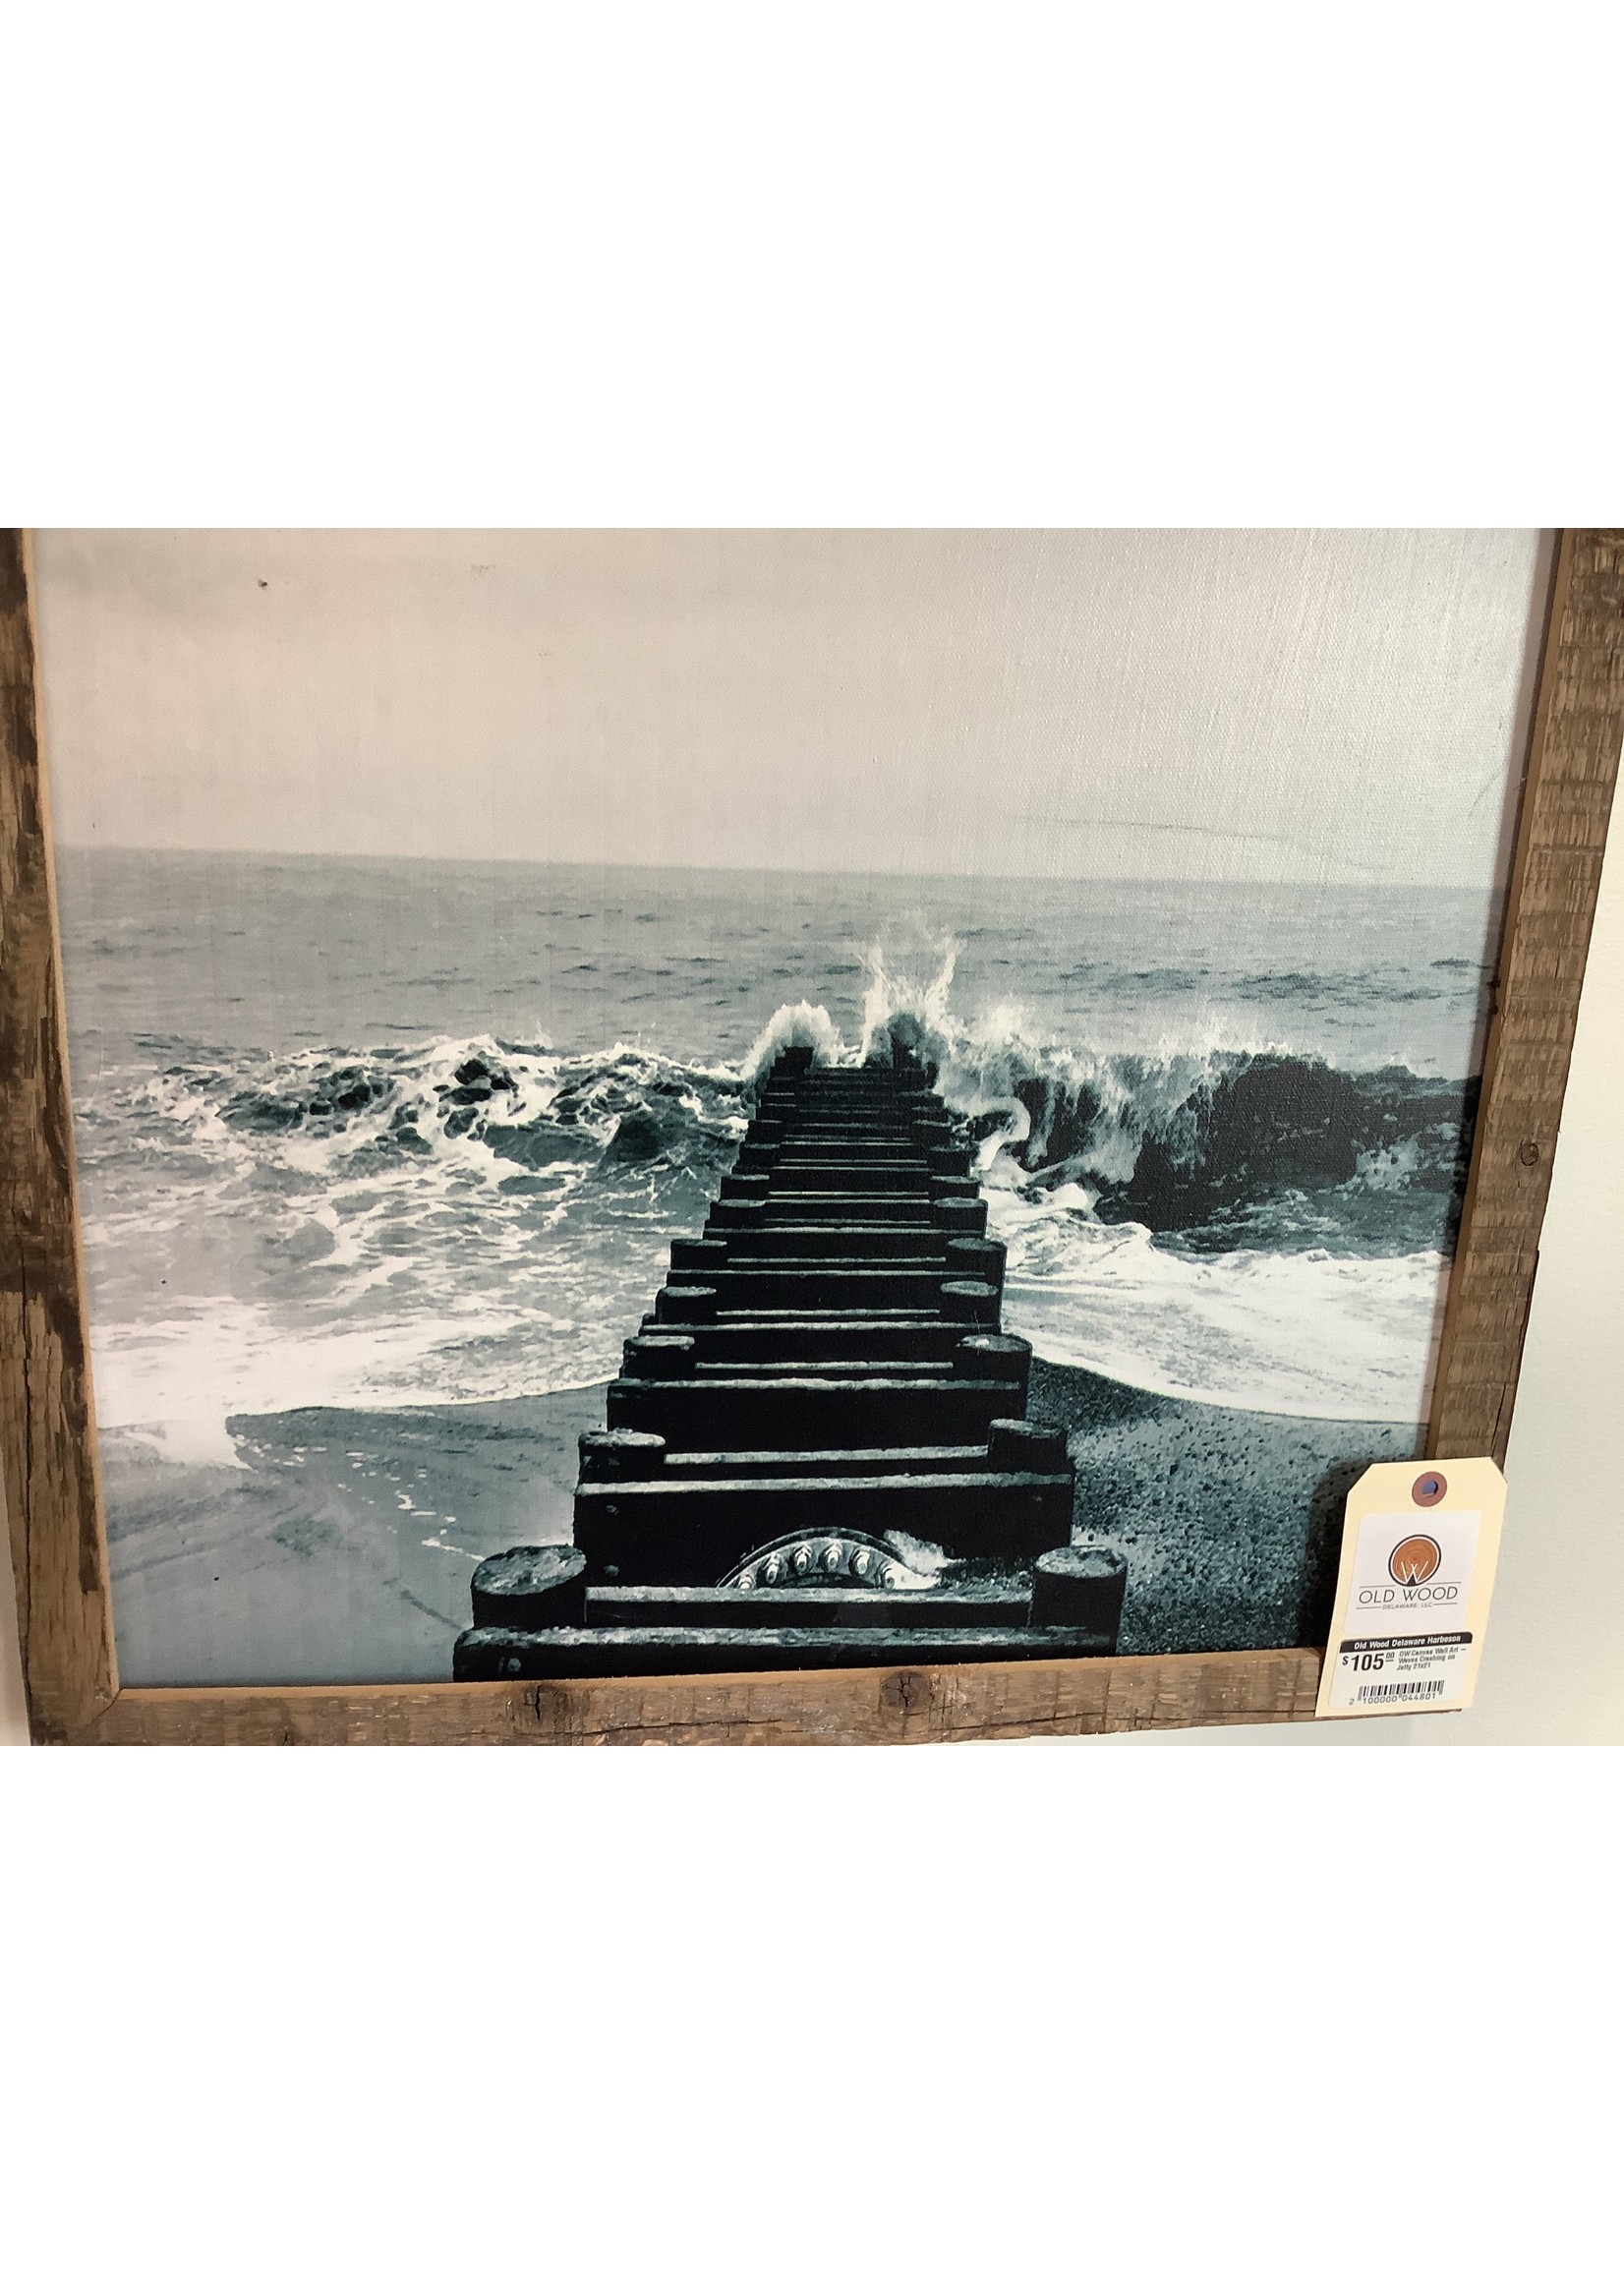 Old Wood Delaware OW Canvas Wall Art - Waves Crashing on Jetty 21x21